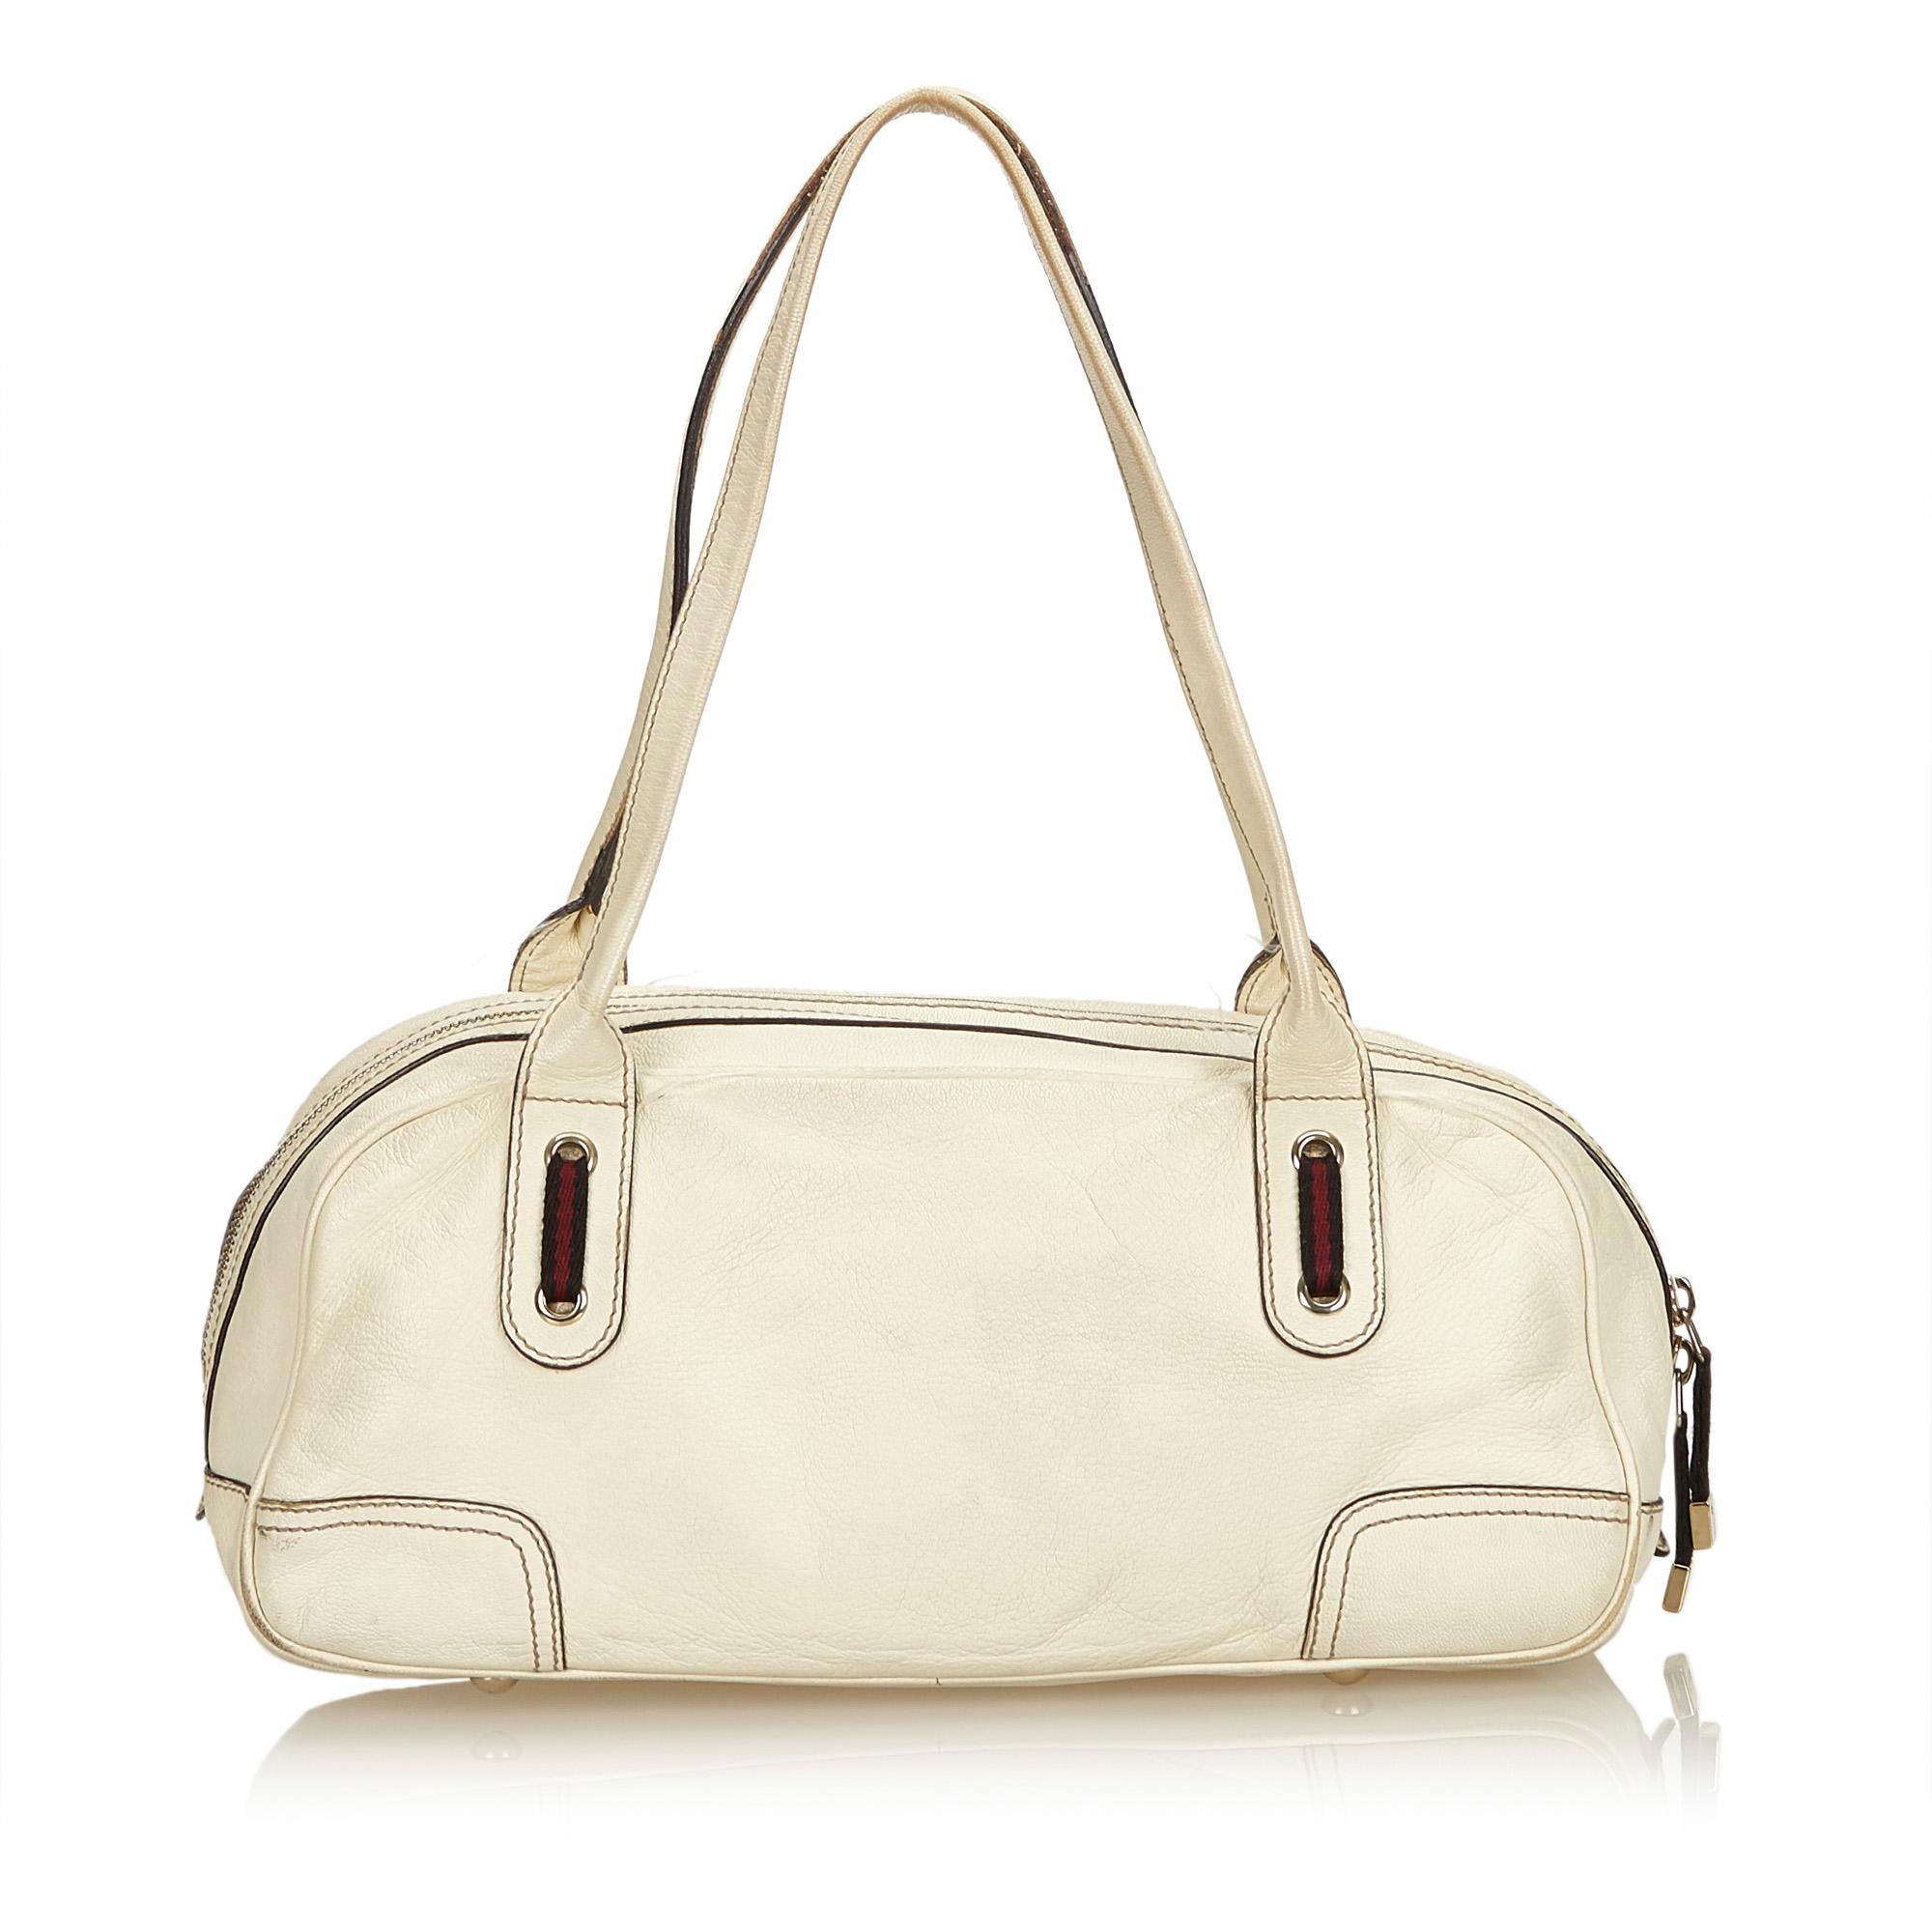 Gucci White Leather Princy Shoulder Bag In Good Condition For Sale In Orlando, FL